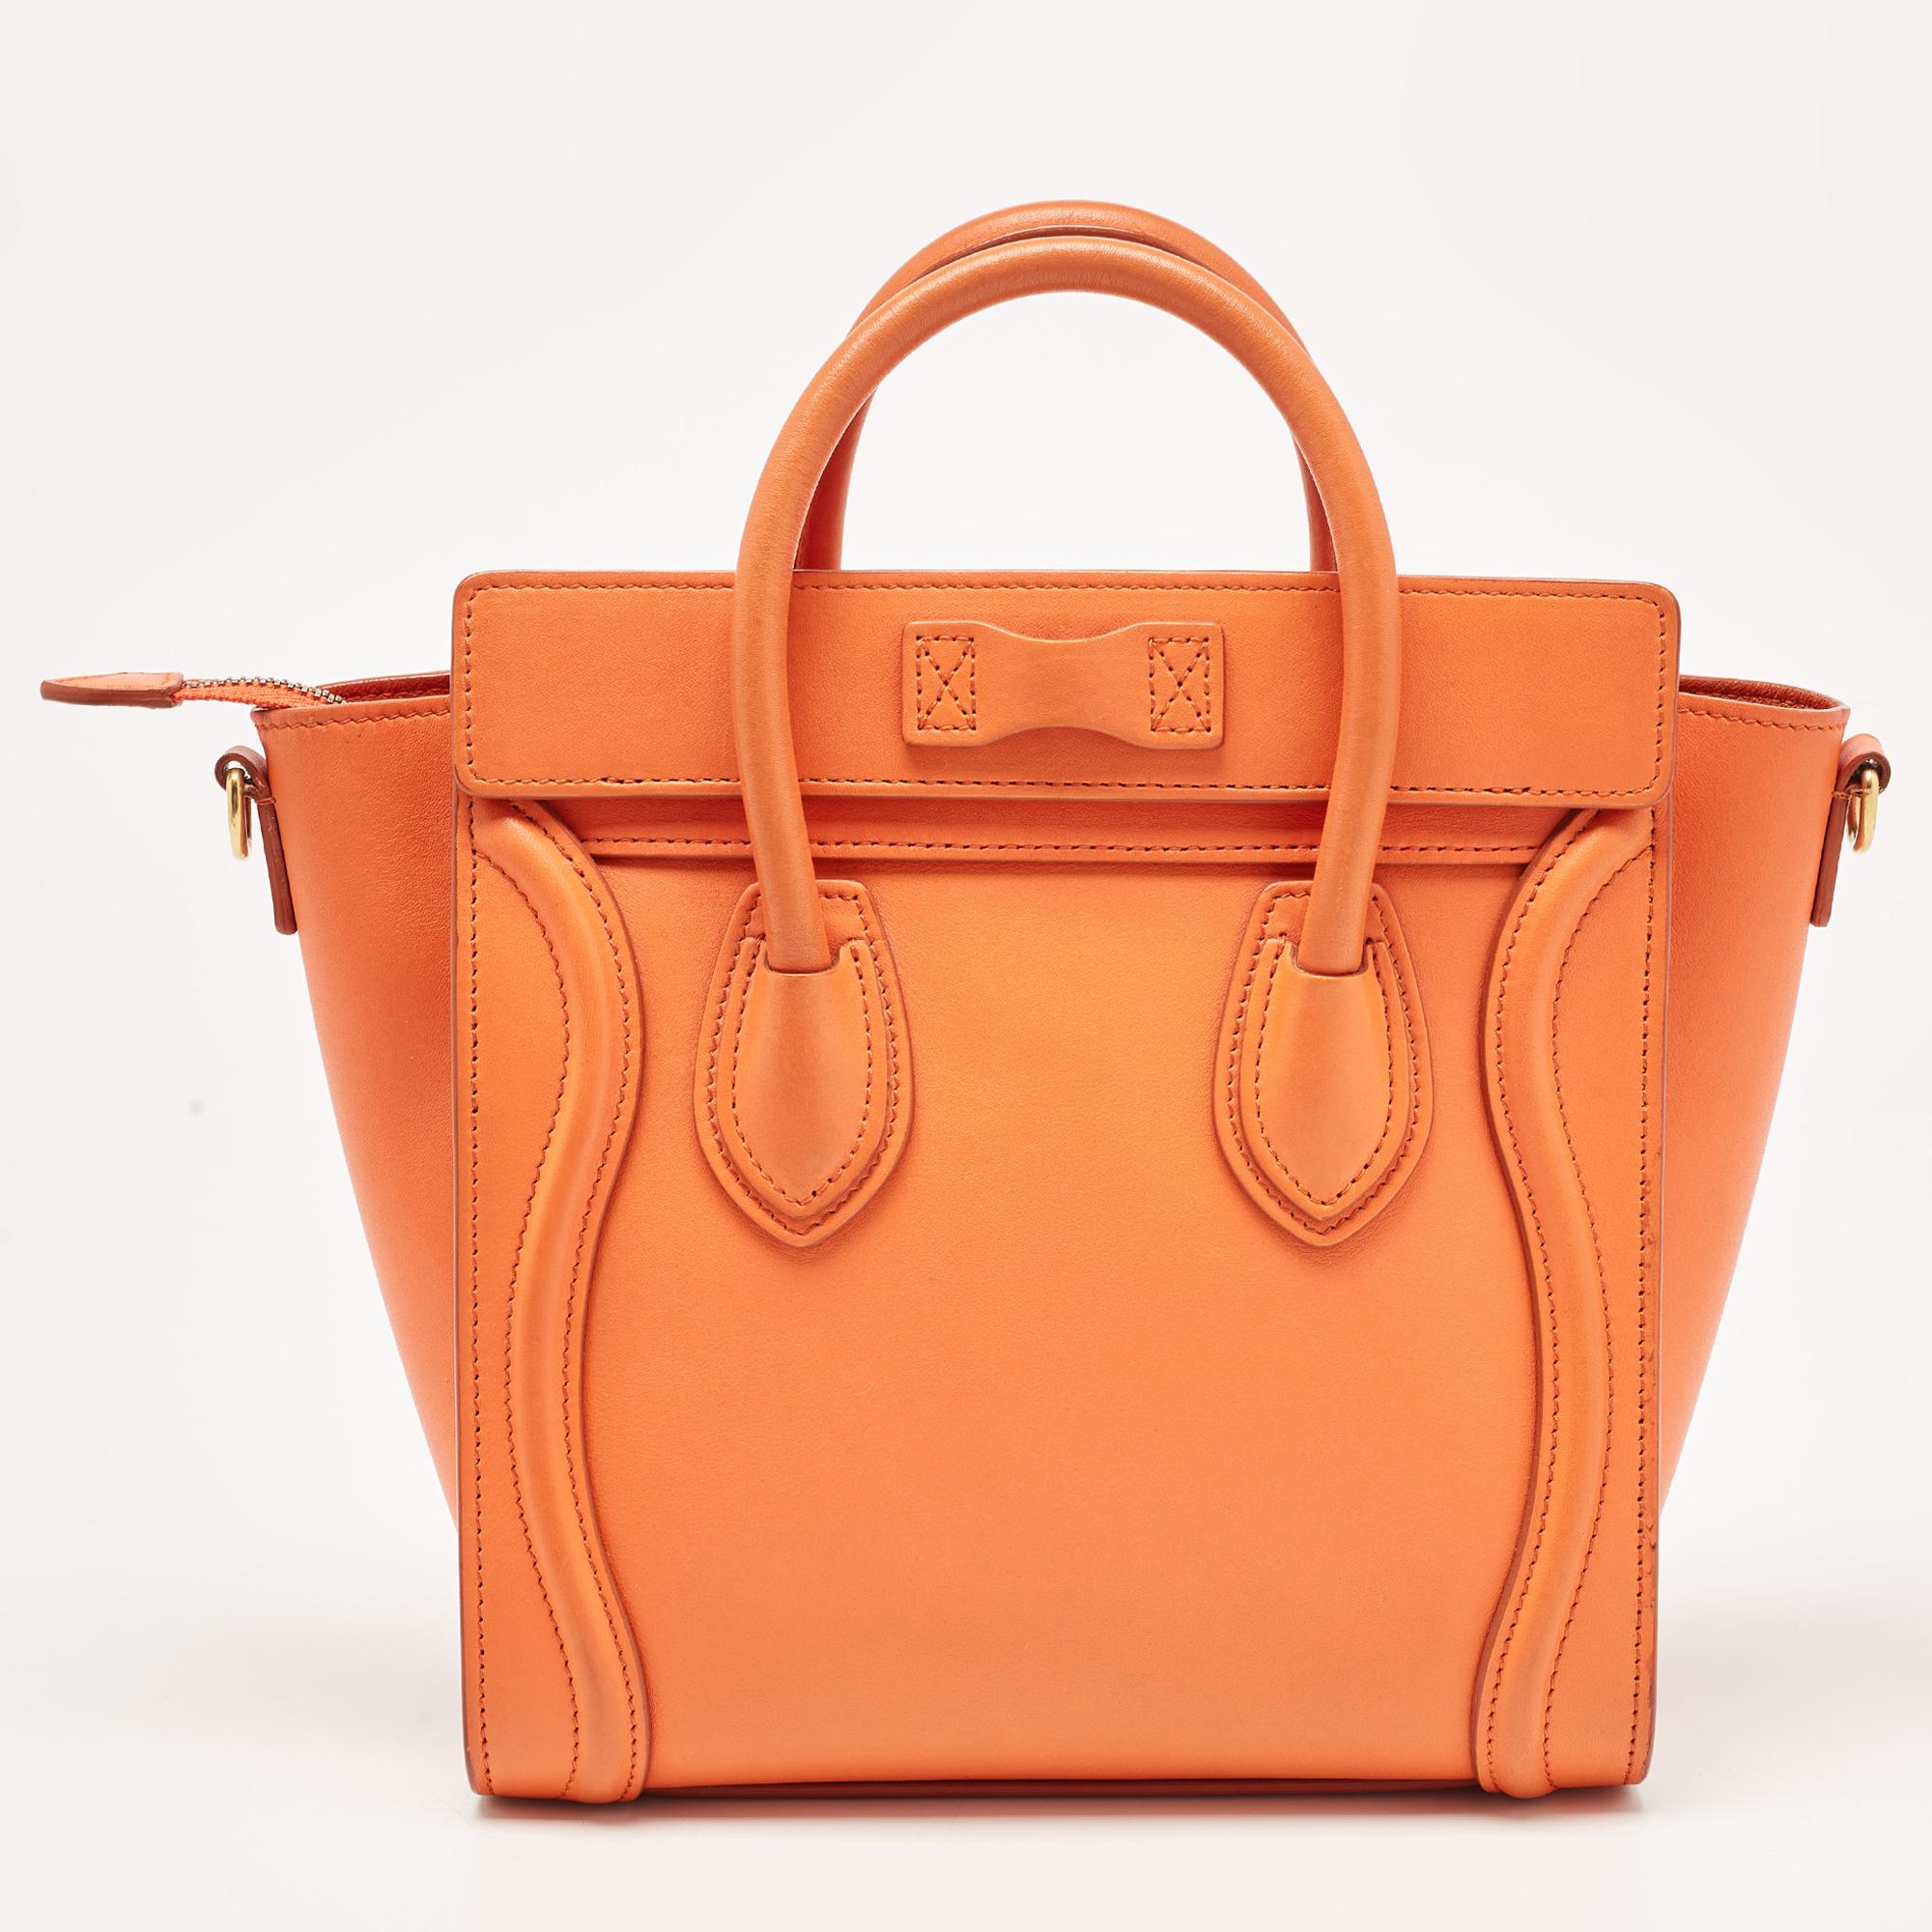 The Luggage tote from Celine is one of the most popular handbags in the world. This tote is crafted from leather and designed in an orange hue. It comes with rolled top handles and a front zip pocket. The bag is equipped with a well-sized suede